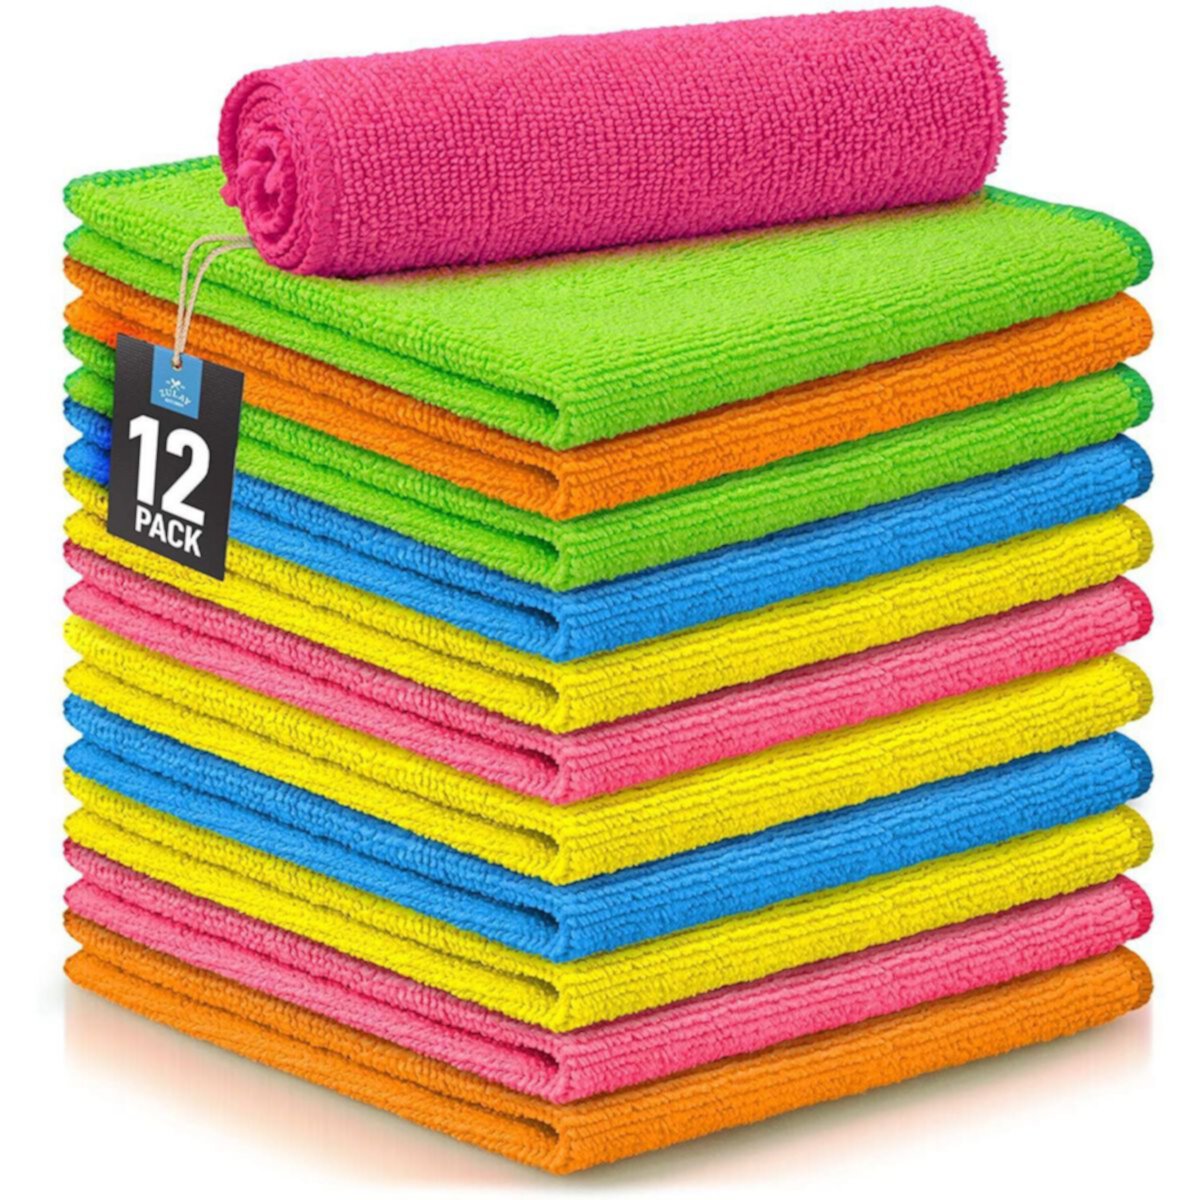 Microfiber Cleaning Cloths - 12 Pack Zulay